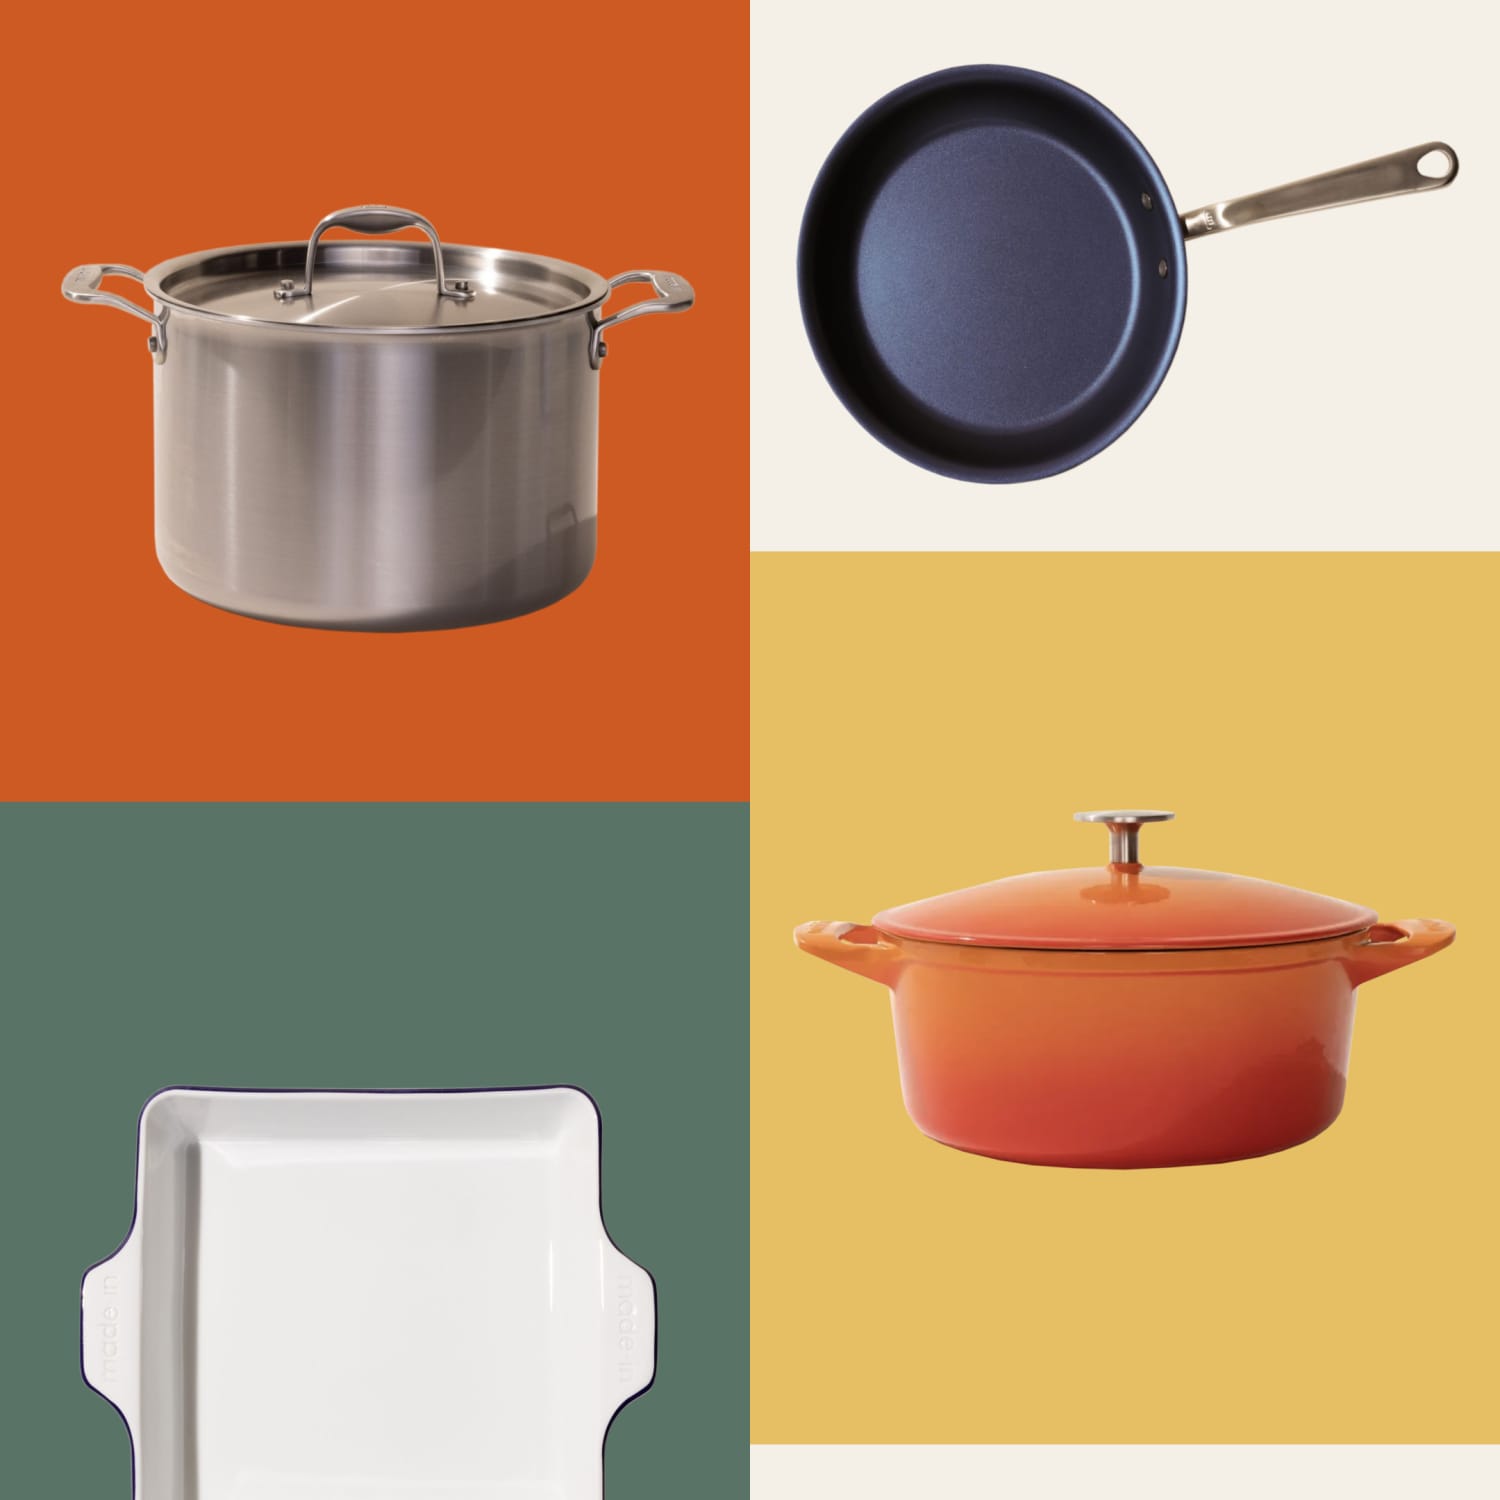 Tom Colicchio Talks Carbon Steel Cookware from Made In